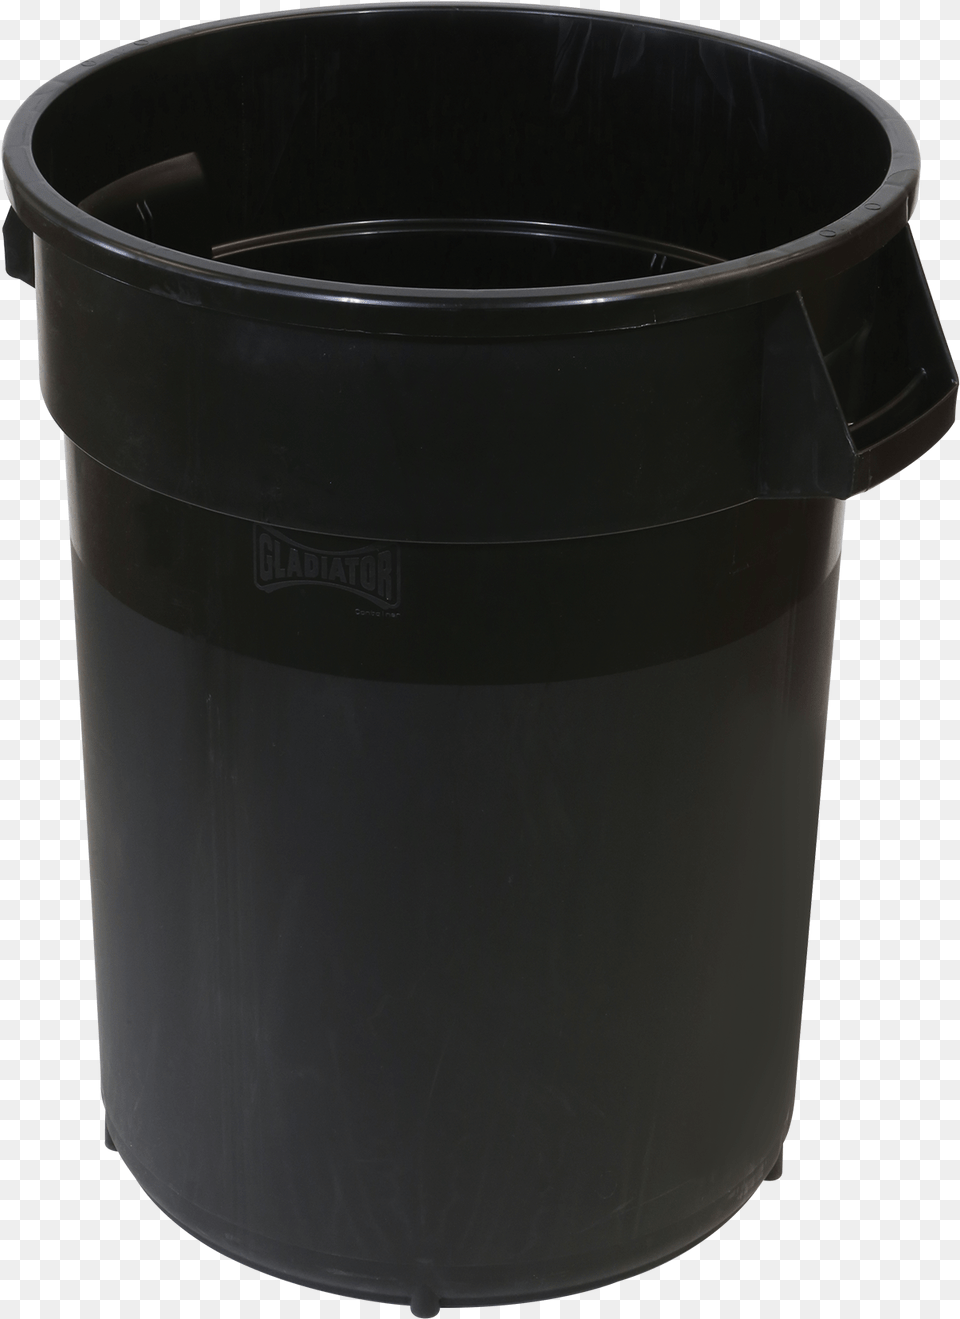 Gladiator Waste Container Black Small Bins, Mailbox, Bucket, Tin Free Transparent Png